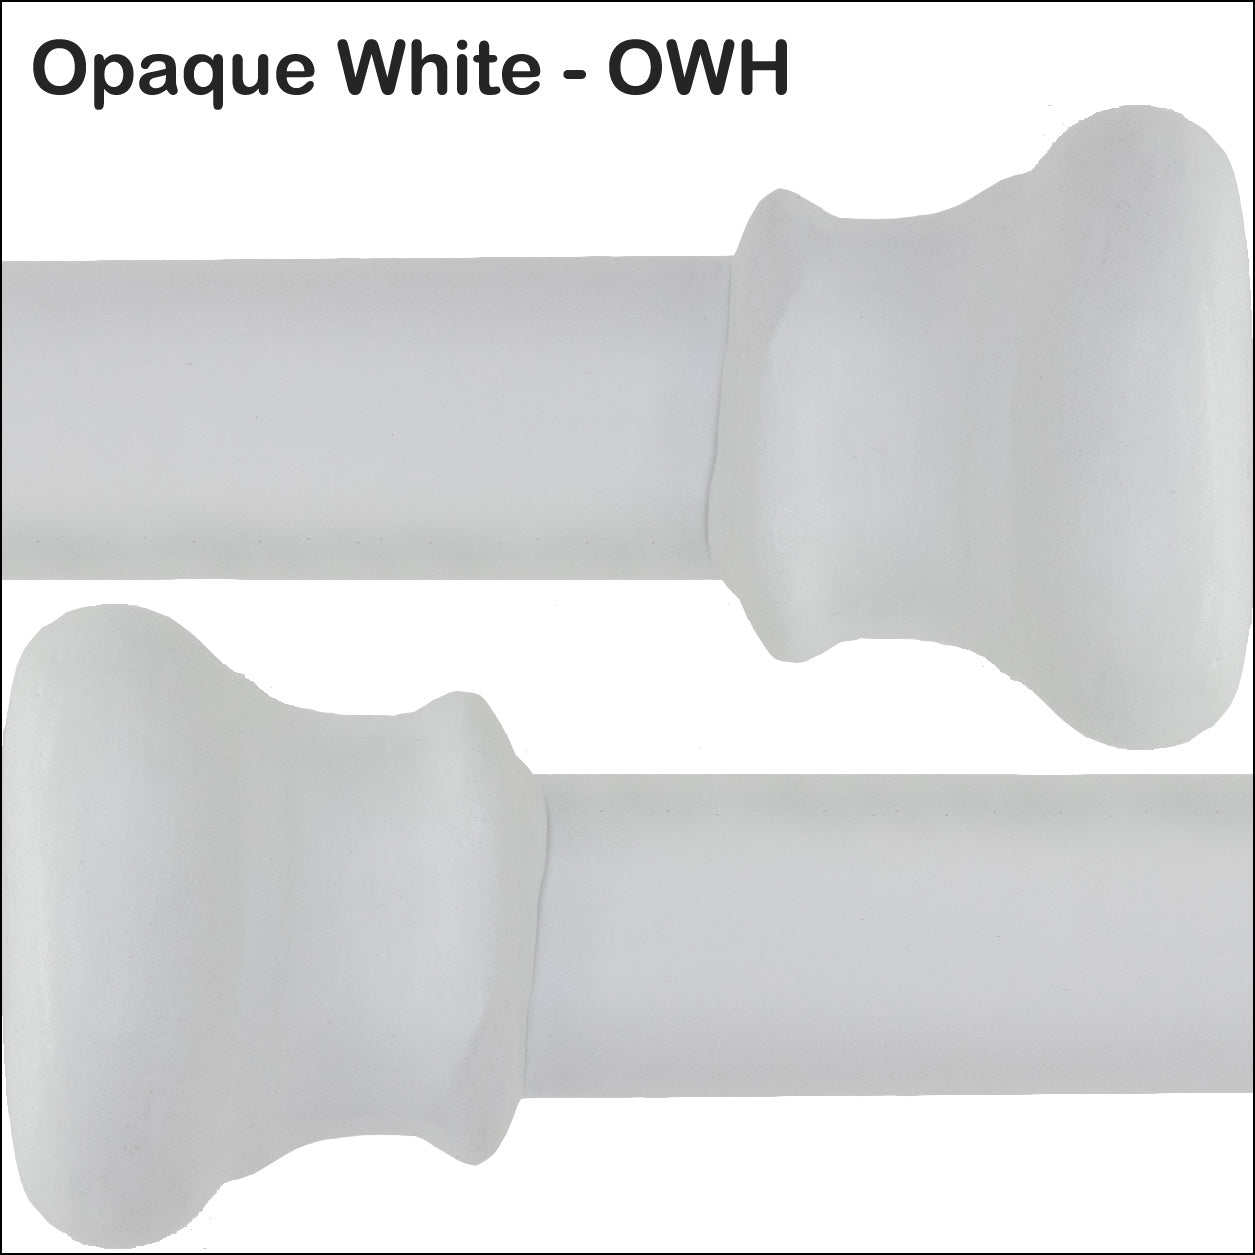 Opaque White OWH Powder Coating Finish Wesley Allen Matriae